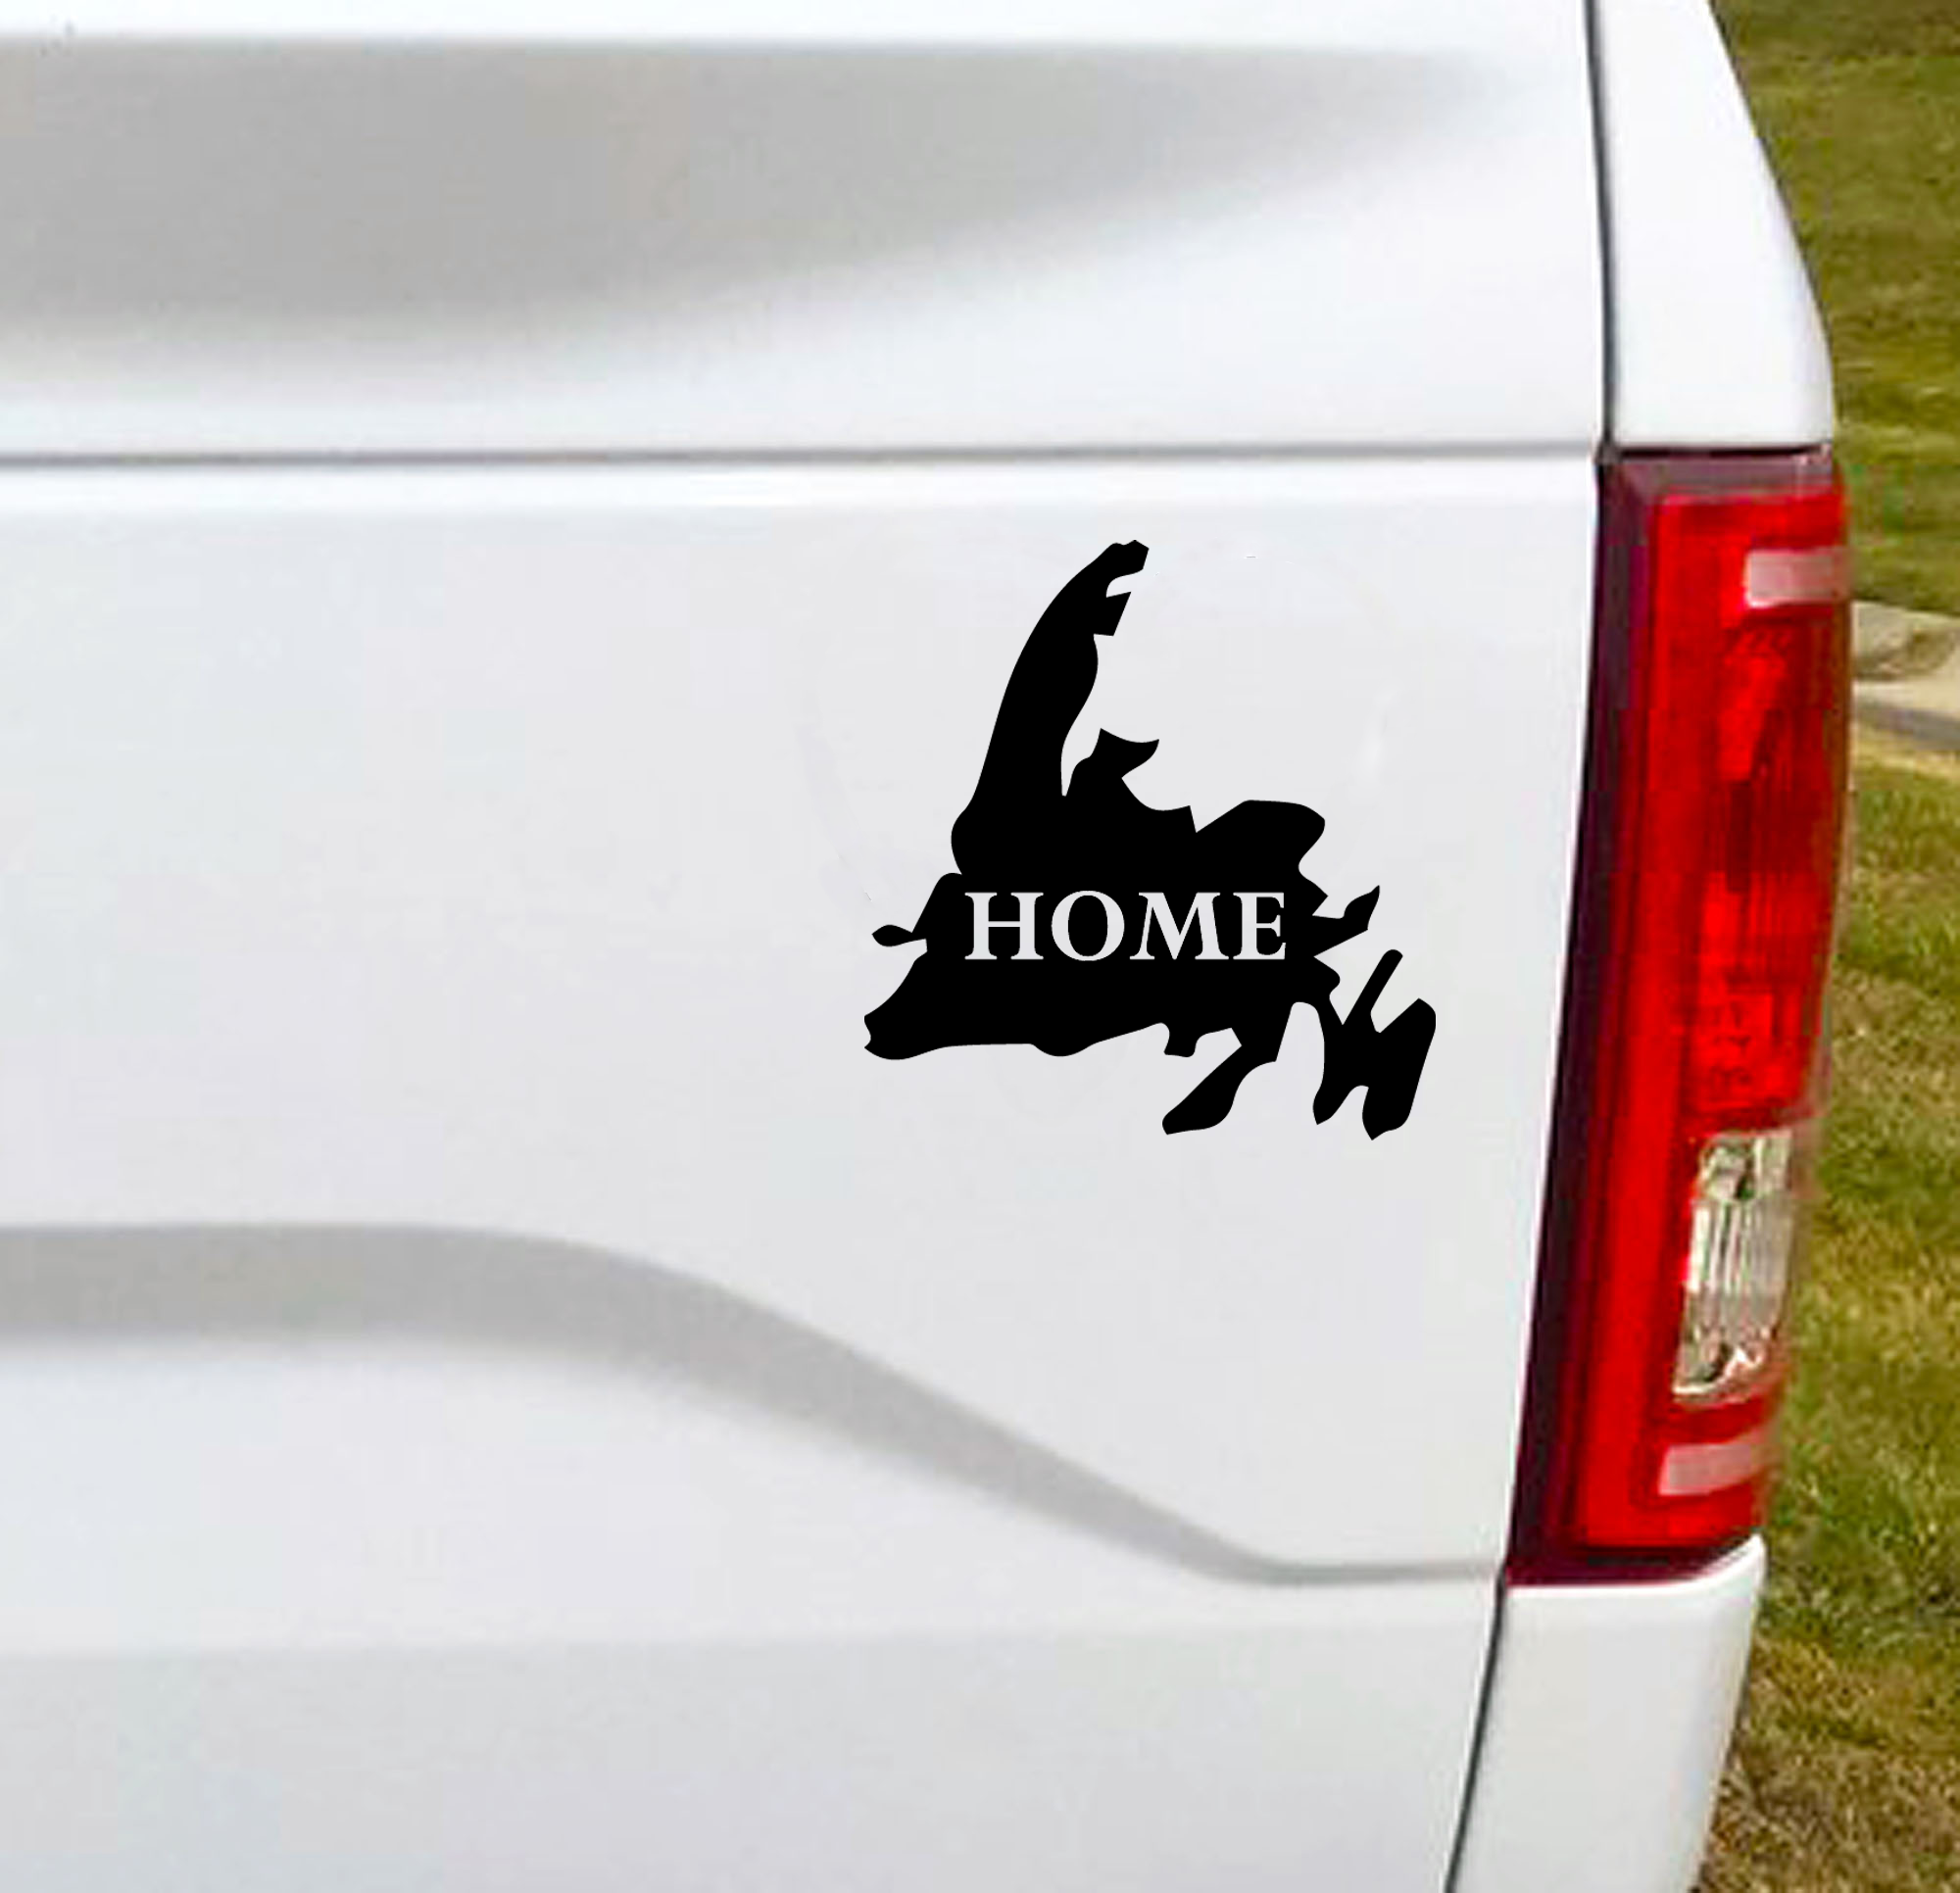 HOME - Newfoundland Vinyl Car Decal Bumper Sticker. From the Rock? You need this vinyl.  5"W x 5"H Funny Car Decal, Car Sticker, Car Vinyl, Bumper Sticker, Vinyl Stickers, Vinyl Sticker.  FREE SHIPPING FOR ALL VINYL DECALS within Canada and the US.